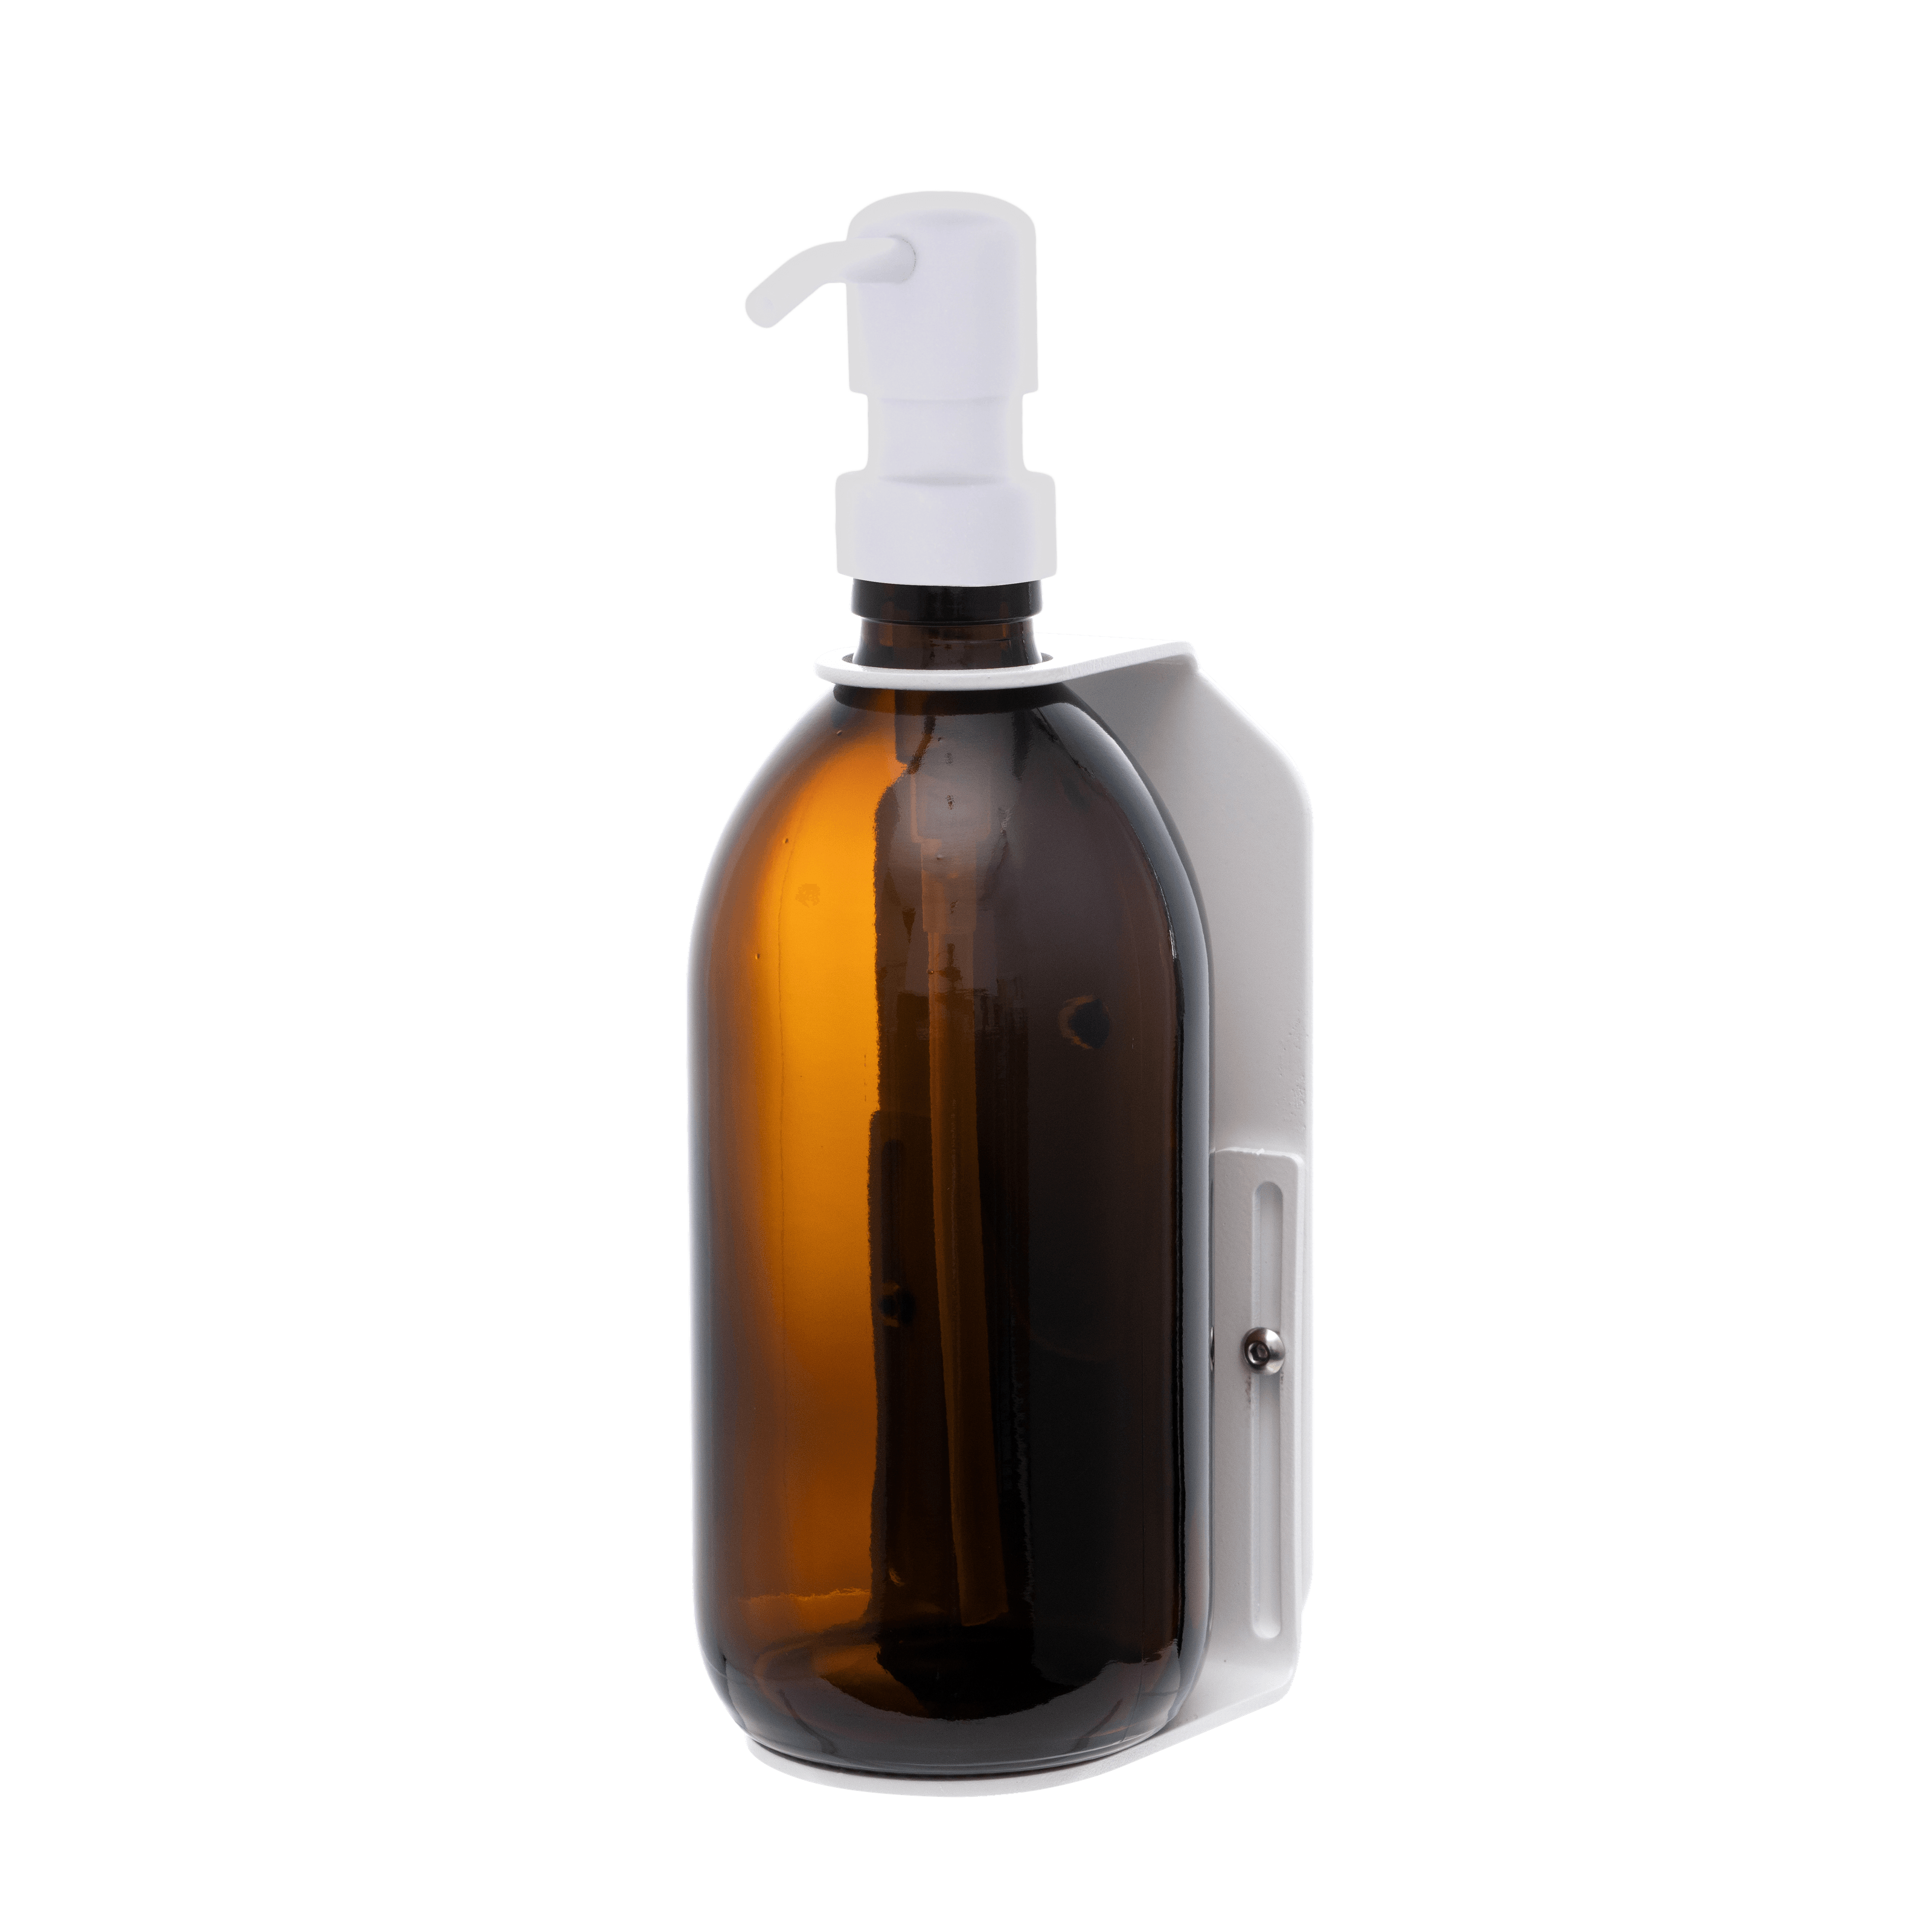 White Wall Mounted Soap Dispenser